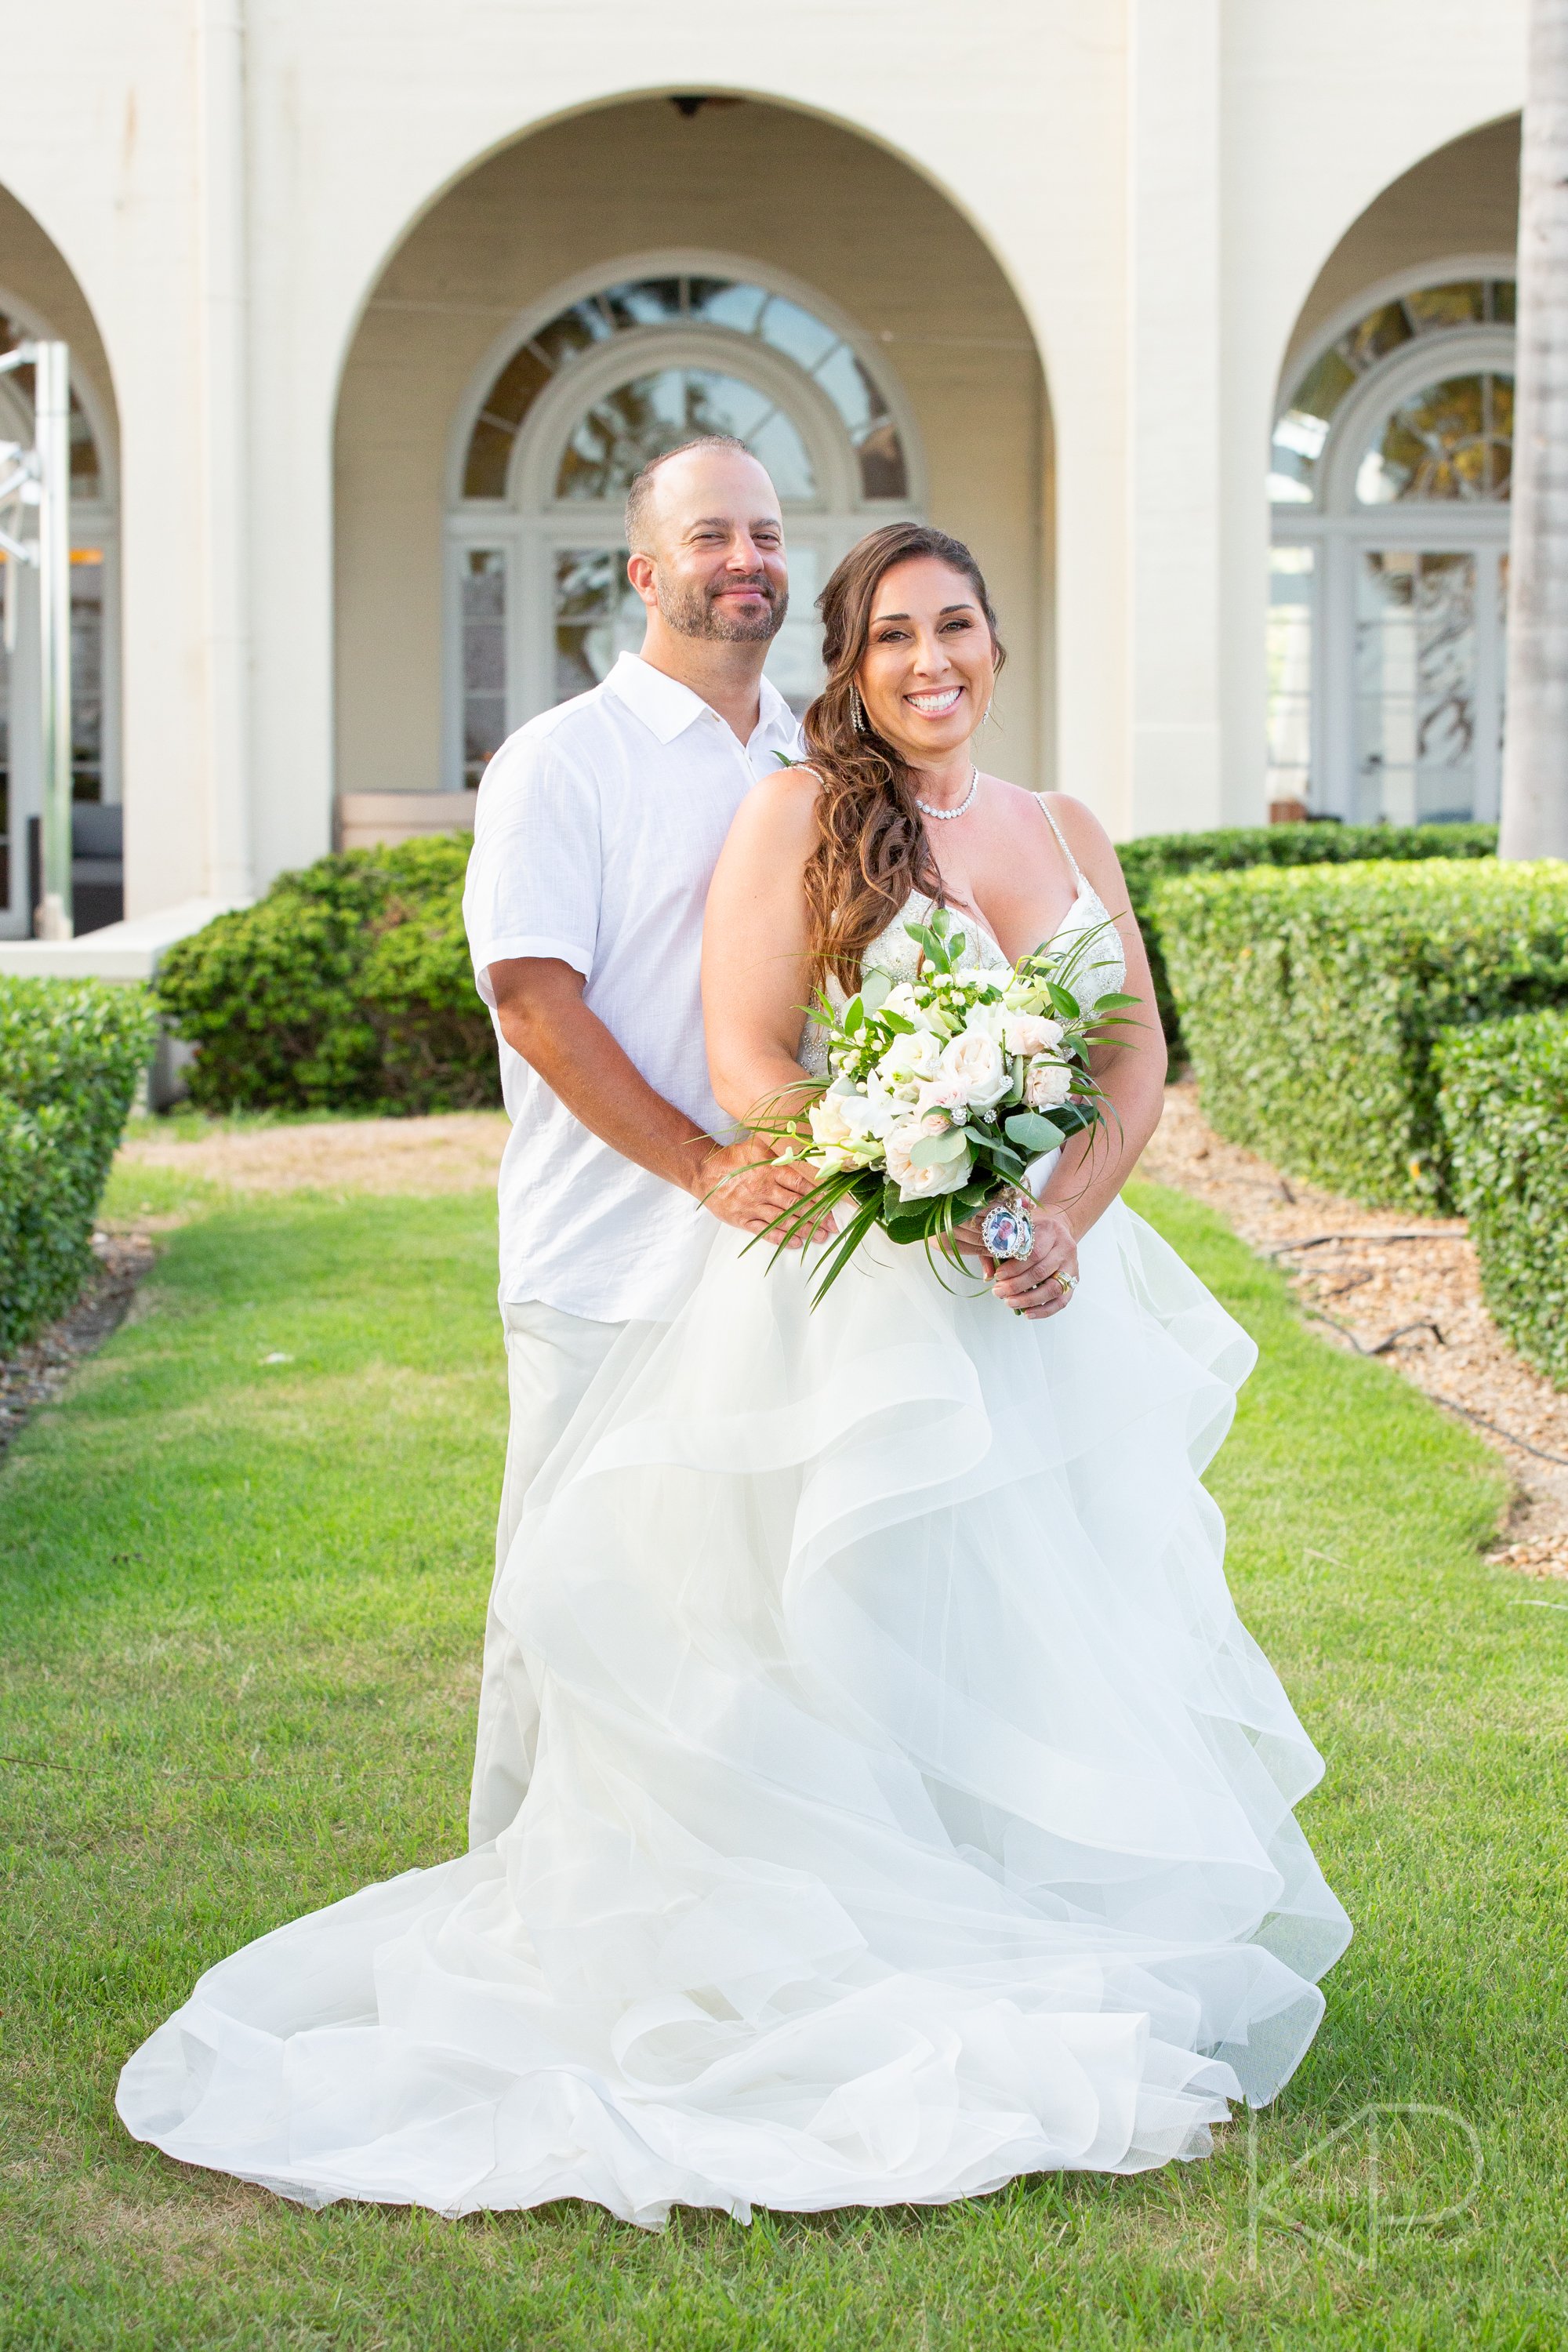  Destination vow renewal wedding anniversary at the Casa Marina Resort in Key West by photographer Karrie Porter 